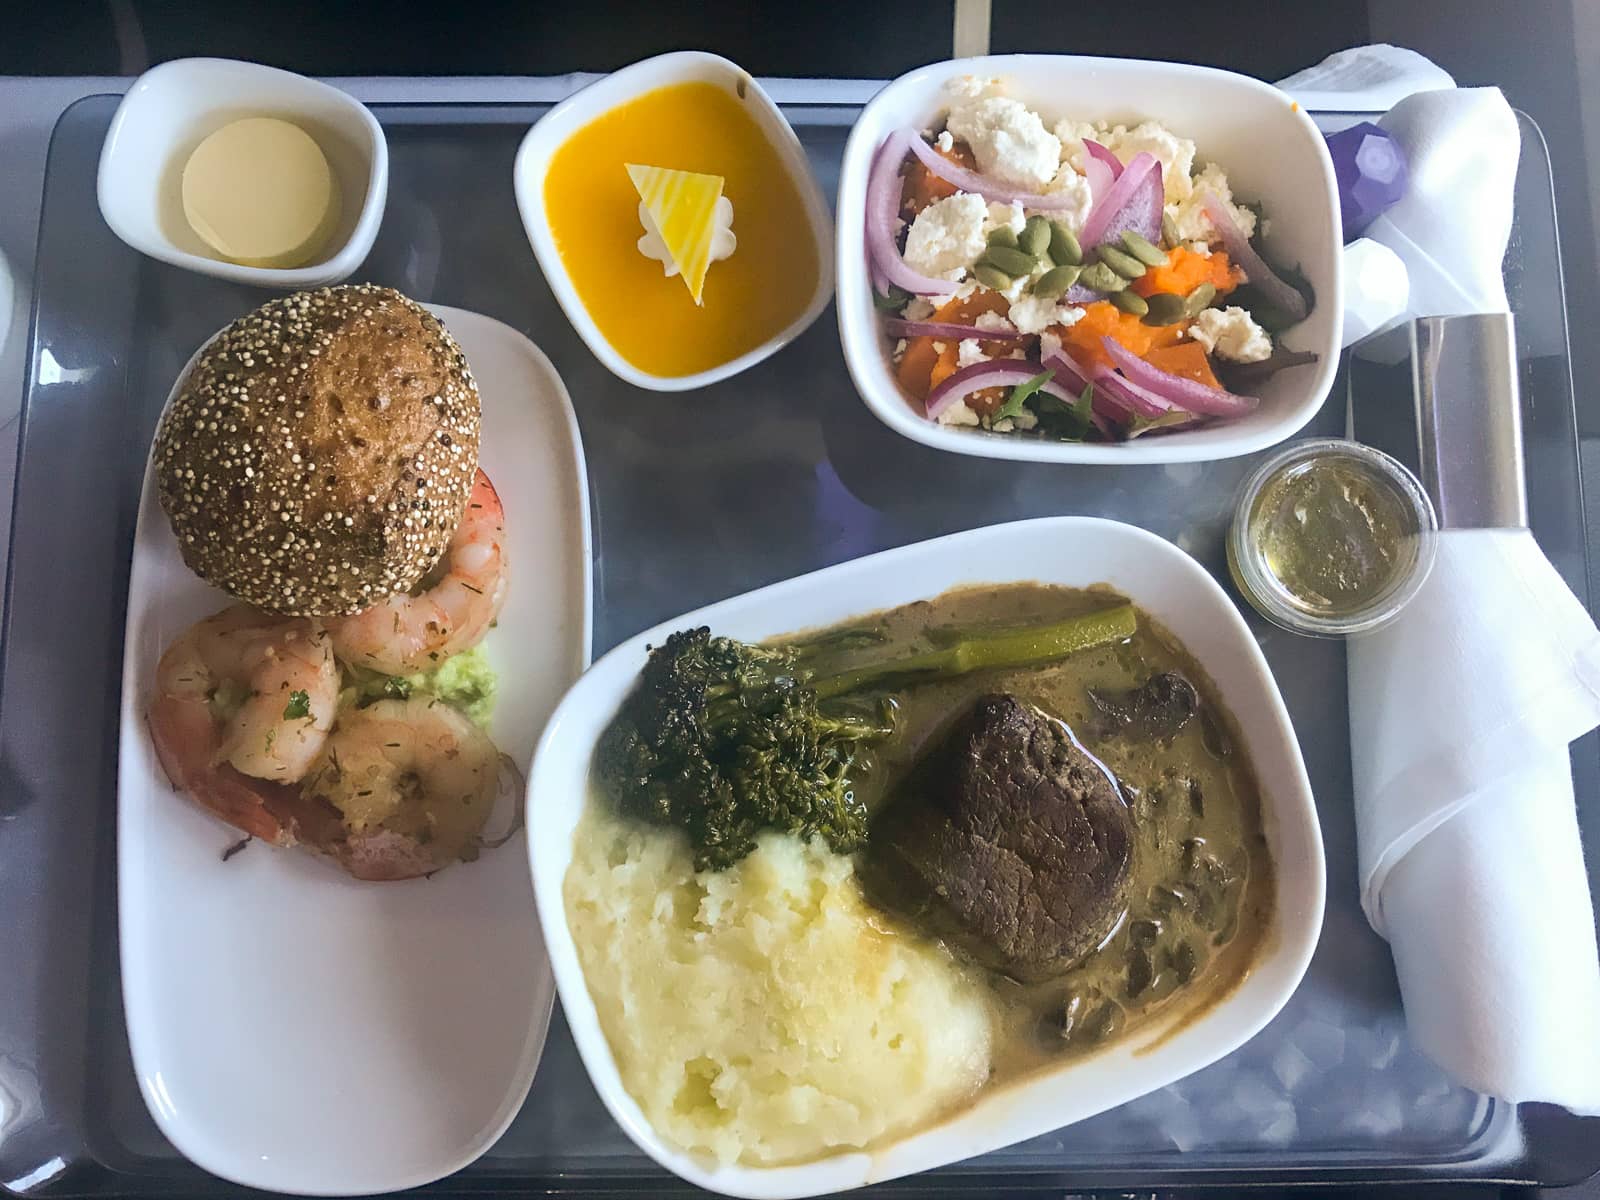 A tray of food on an airplane tray table. There is a bowl of salad; a bowl of meat, broccolini and potato; a plate of small prawns; and a small dessert